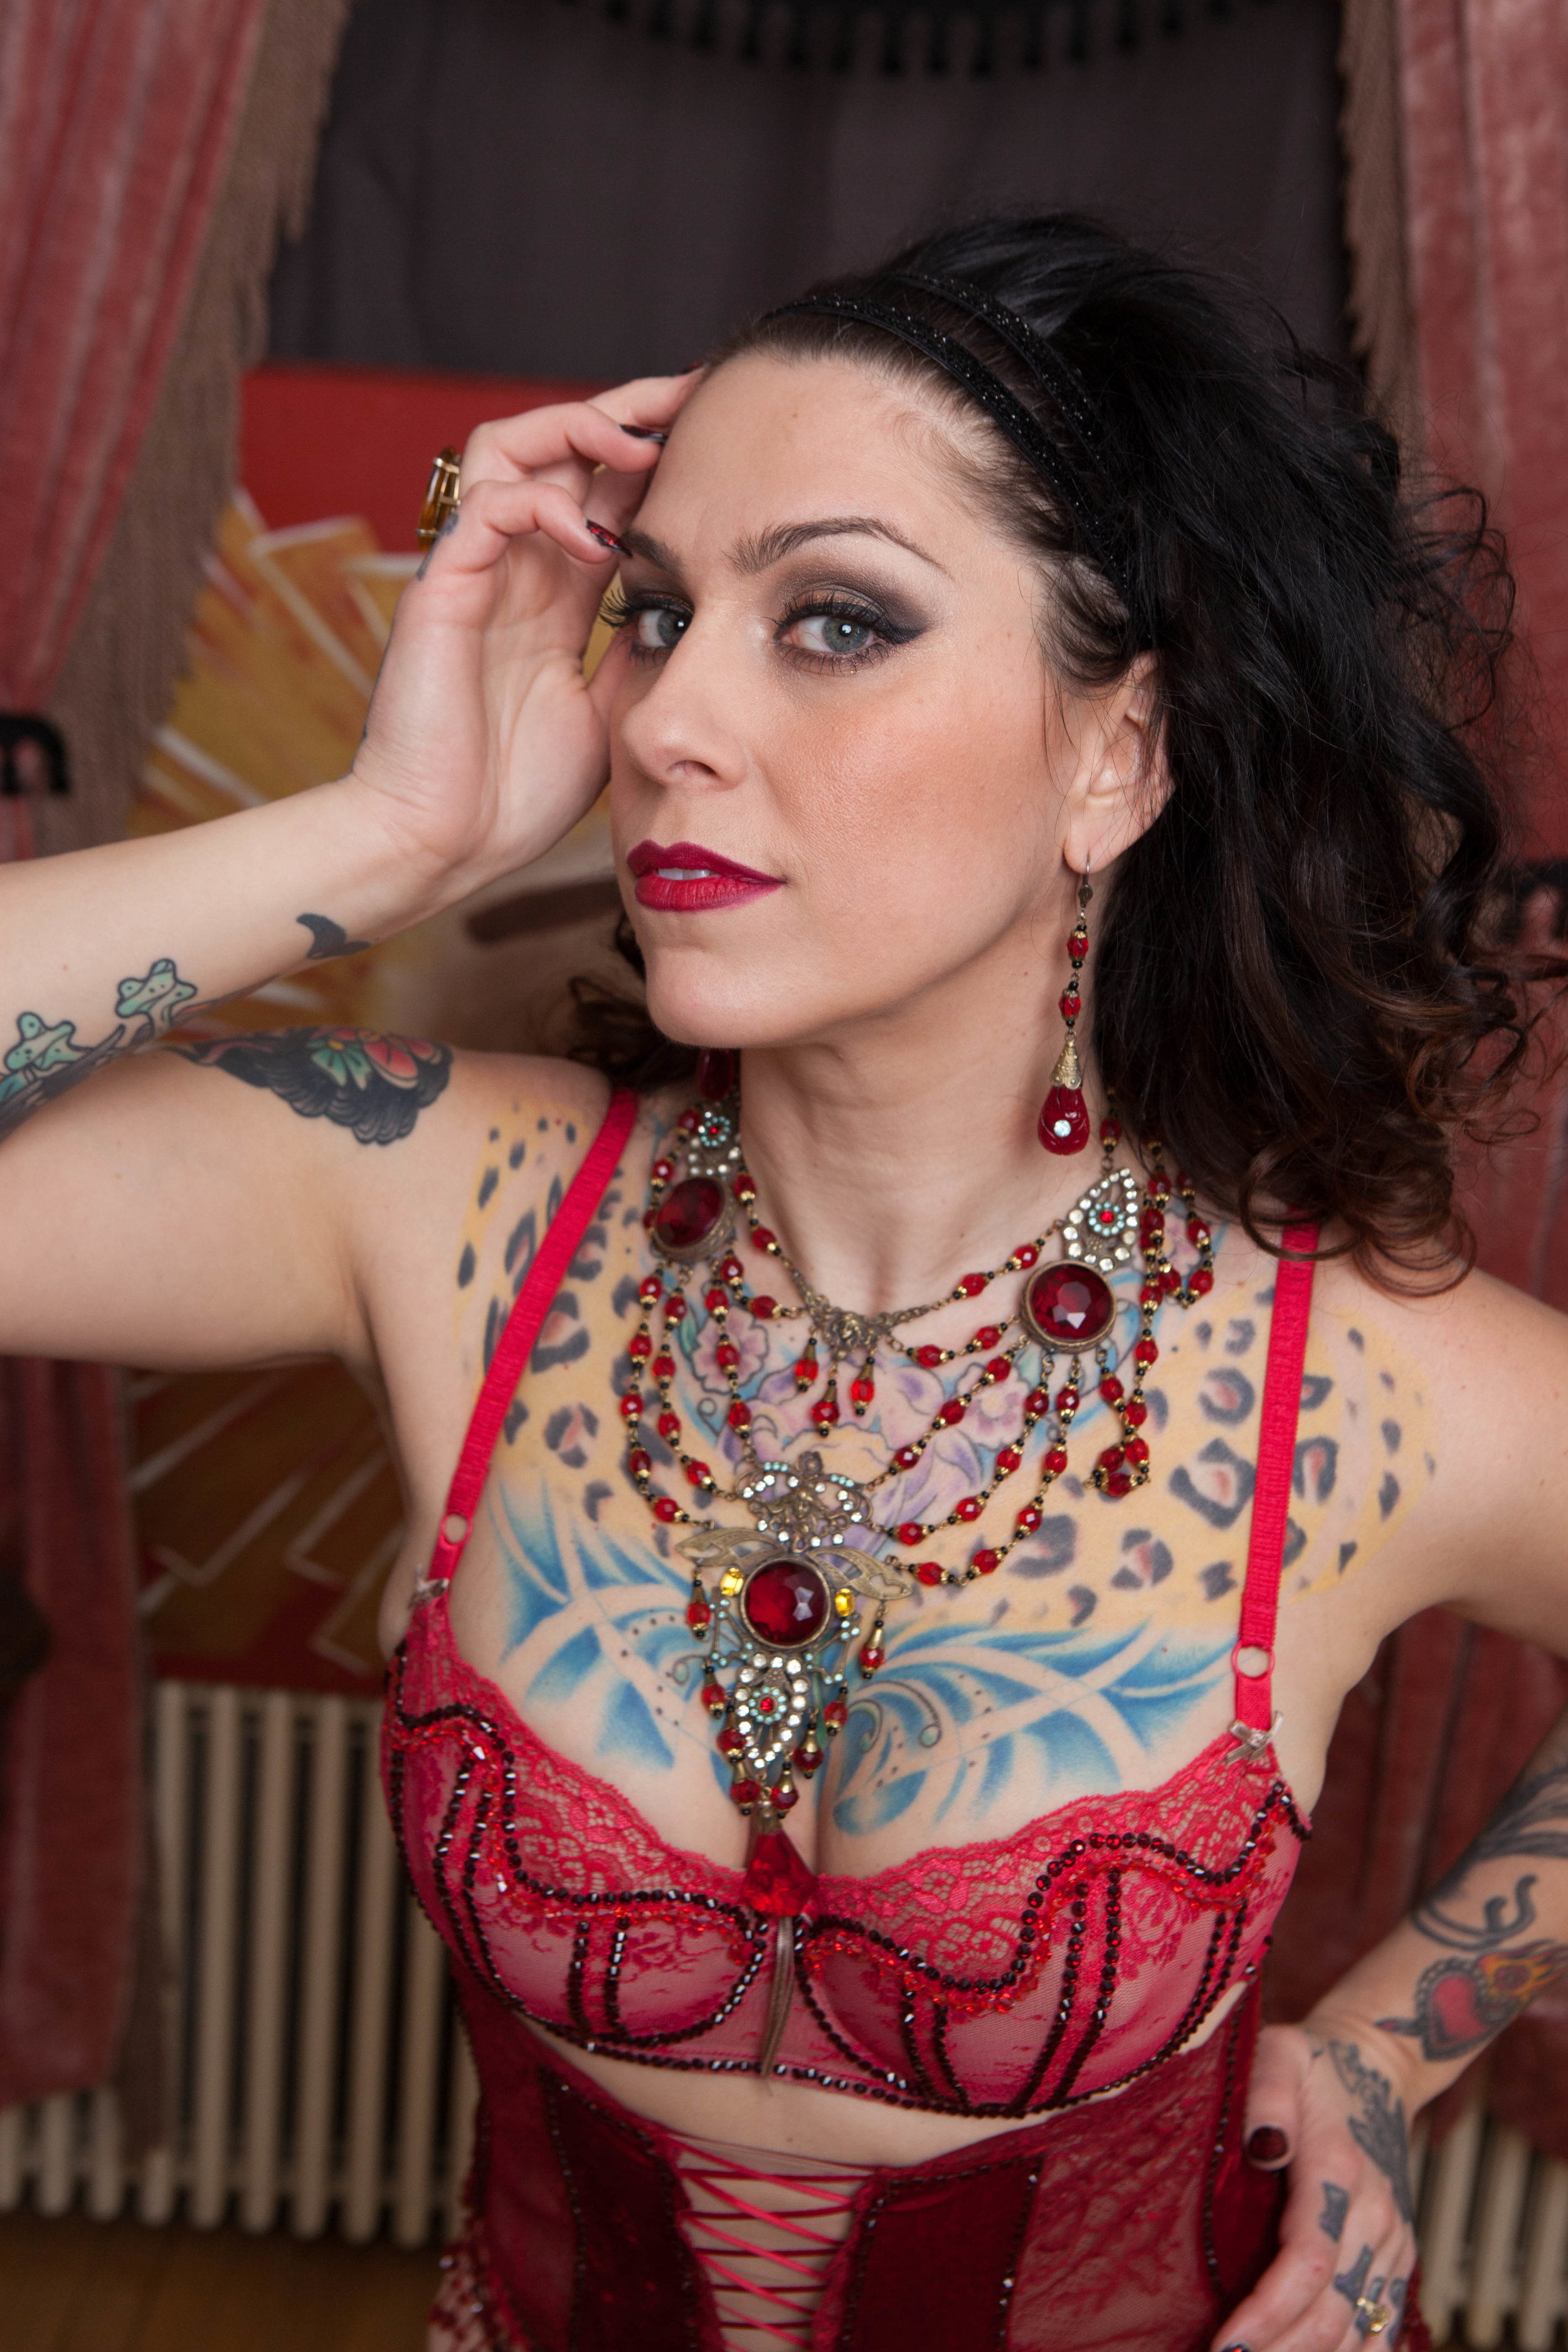 Images & Media - DANIELLE COLBY.